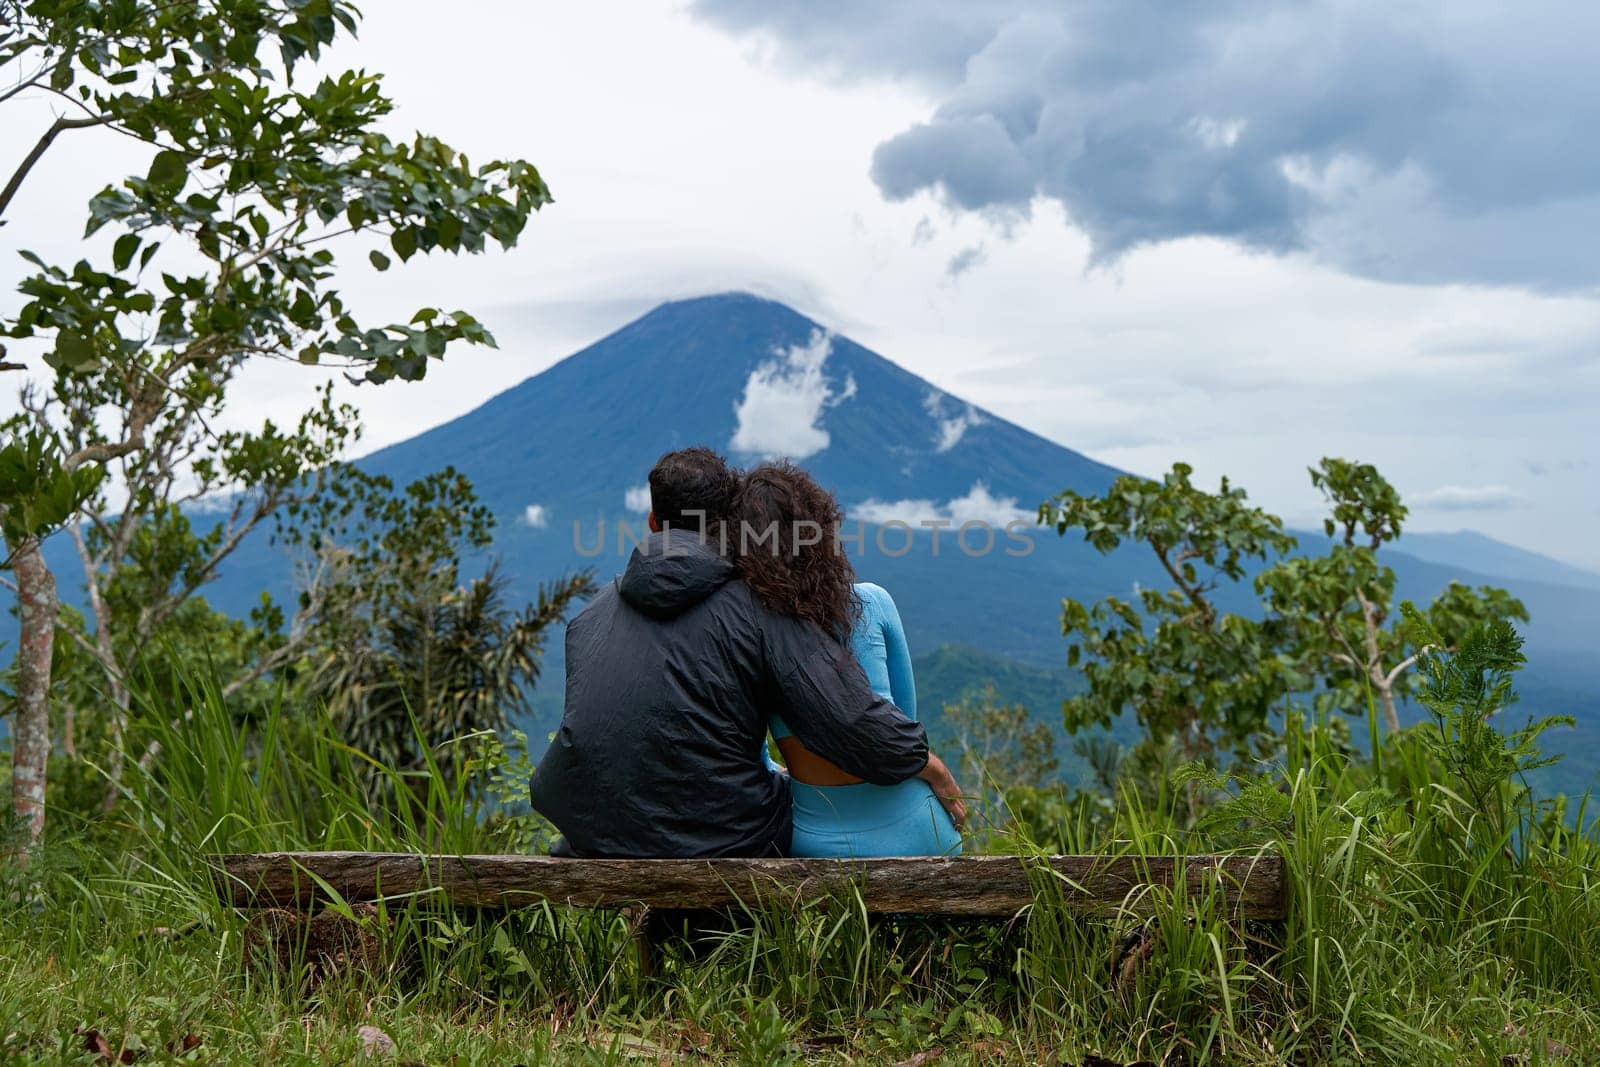 A couple of lovers are sitting on a bench, hugging each other and enjoying the view of the popular sacred cloud-covered Mount Agung on the island of Bali